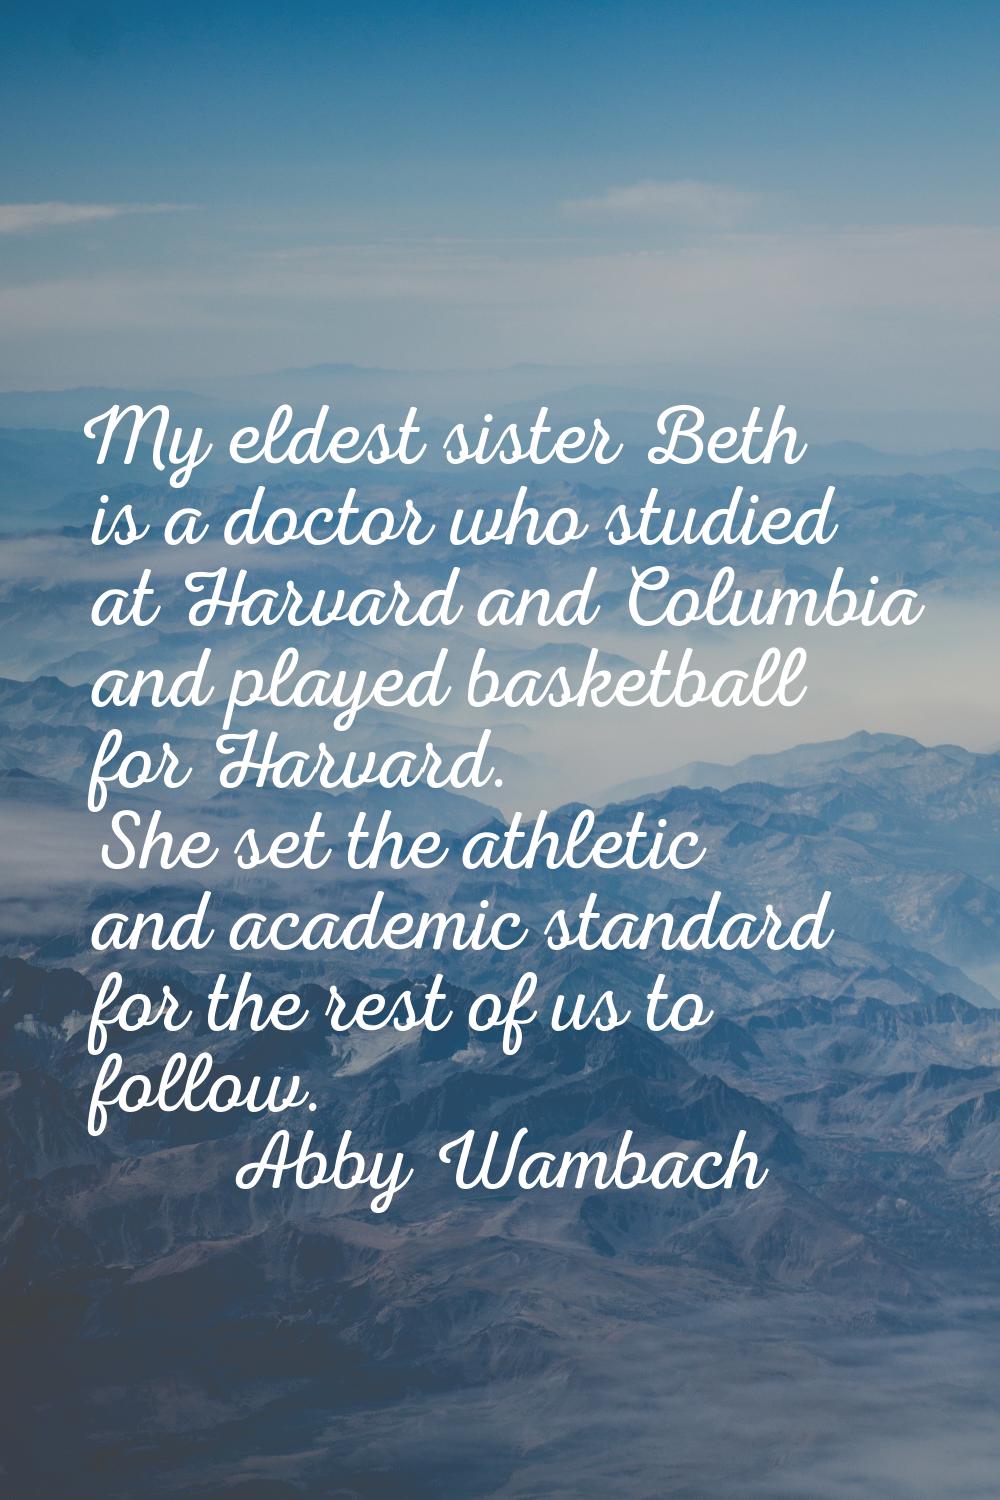 My eldest sister Beth is a doctor who studied at Harvard and Columbia and played basketball for Har